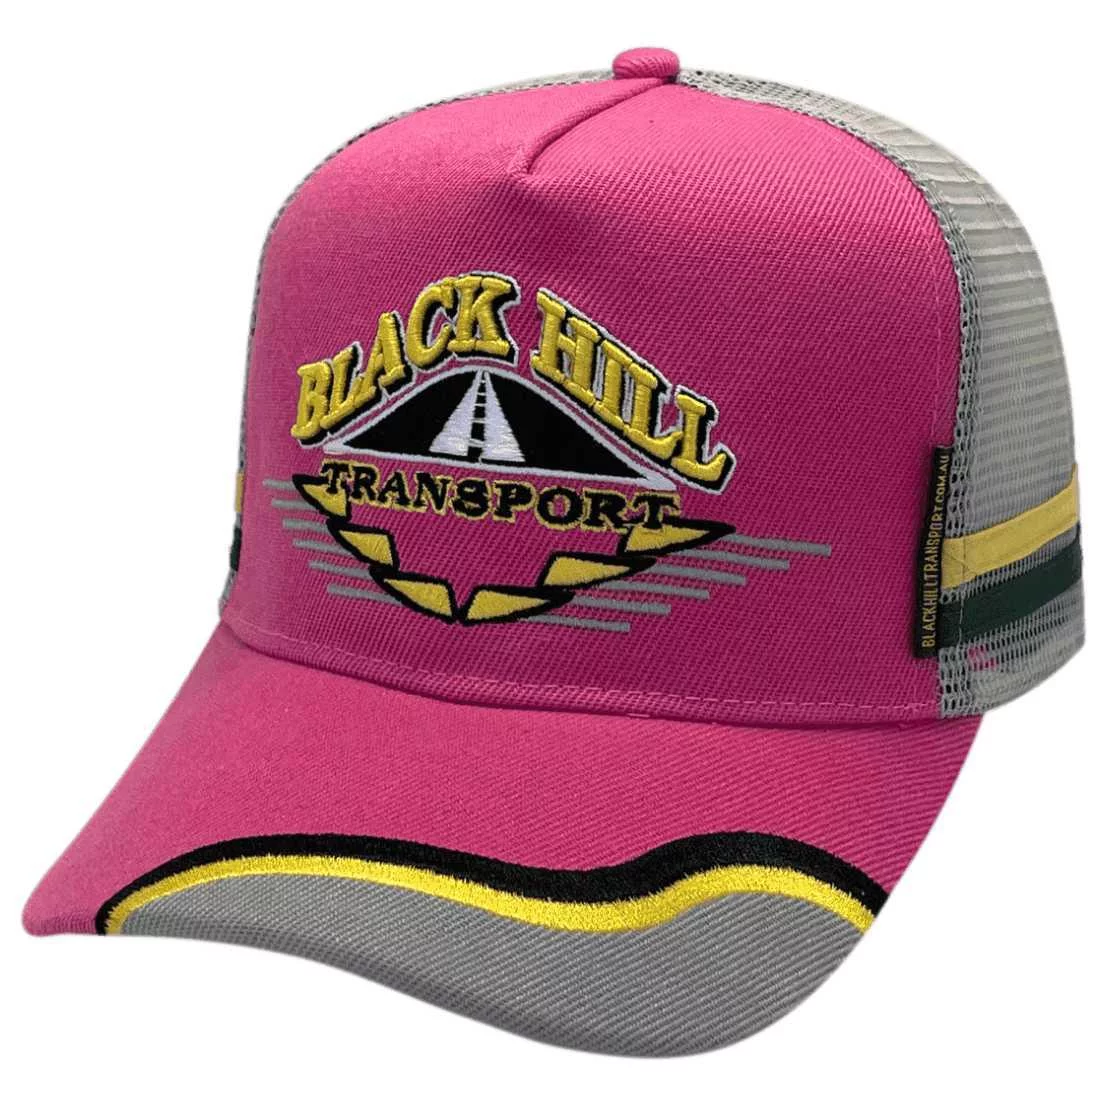 Black Hill Transport Black Hill NSW HP Original Power Aussie Trucker Hat with Australian Head Fit Crown with Double Side Bands Pink